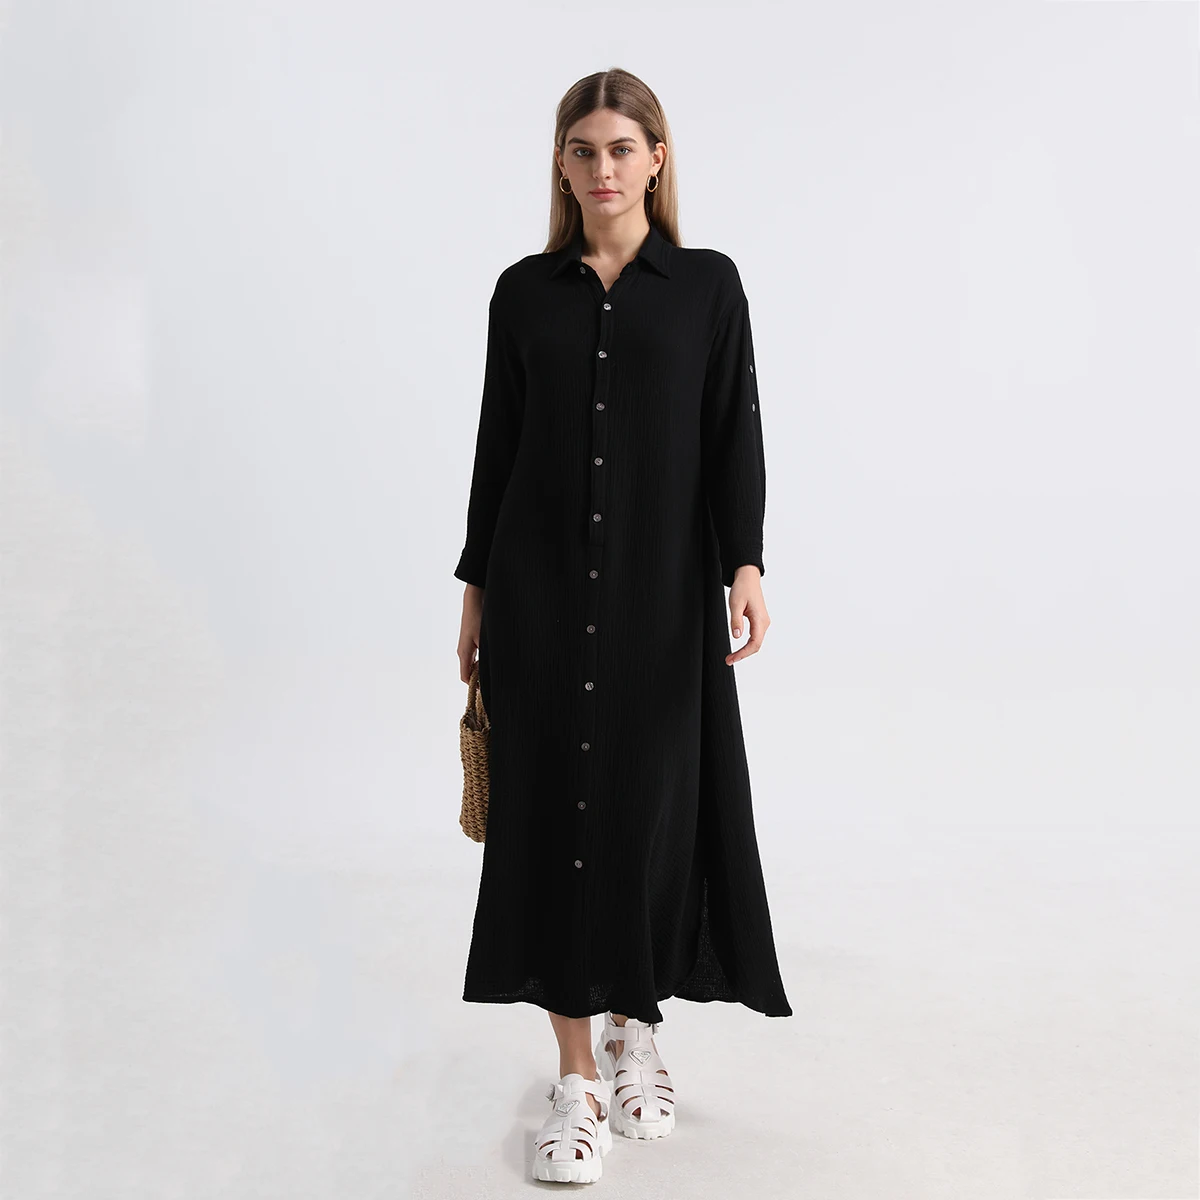 AP 2024 Spring and Summer Women Muslin Shirt Dress Lady Cotton Dress Casual Side Slits Sleeve Length Can Be Adjusted